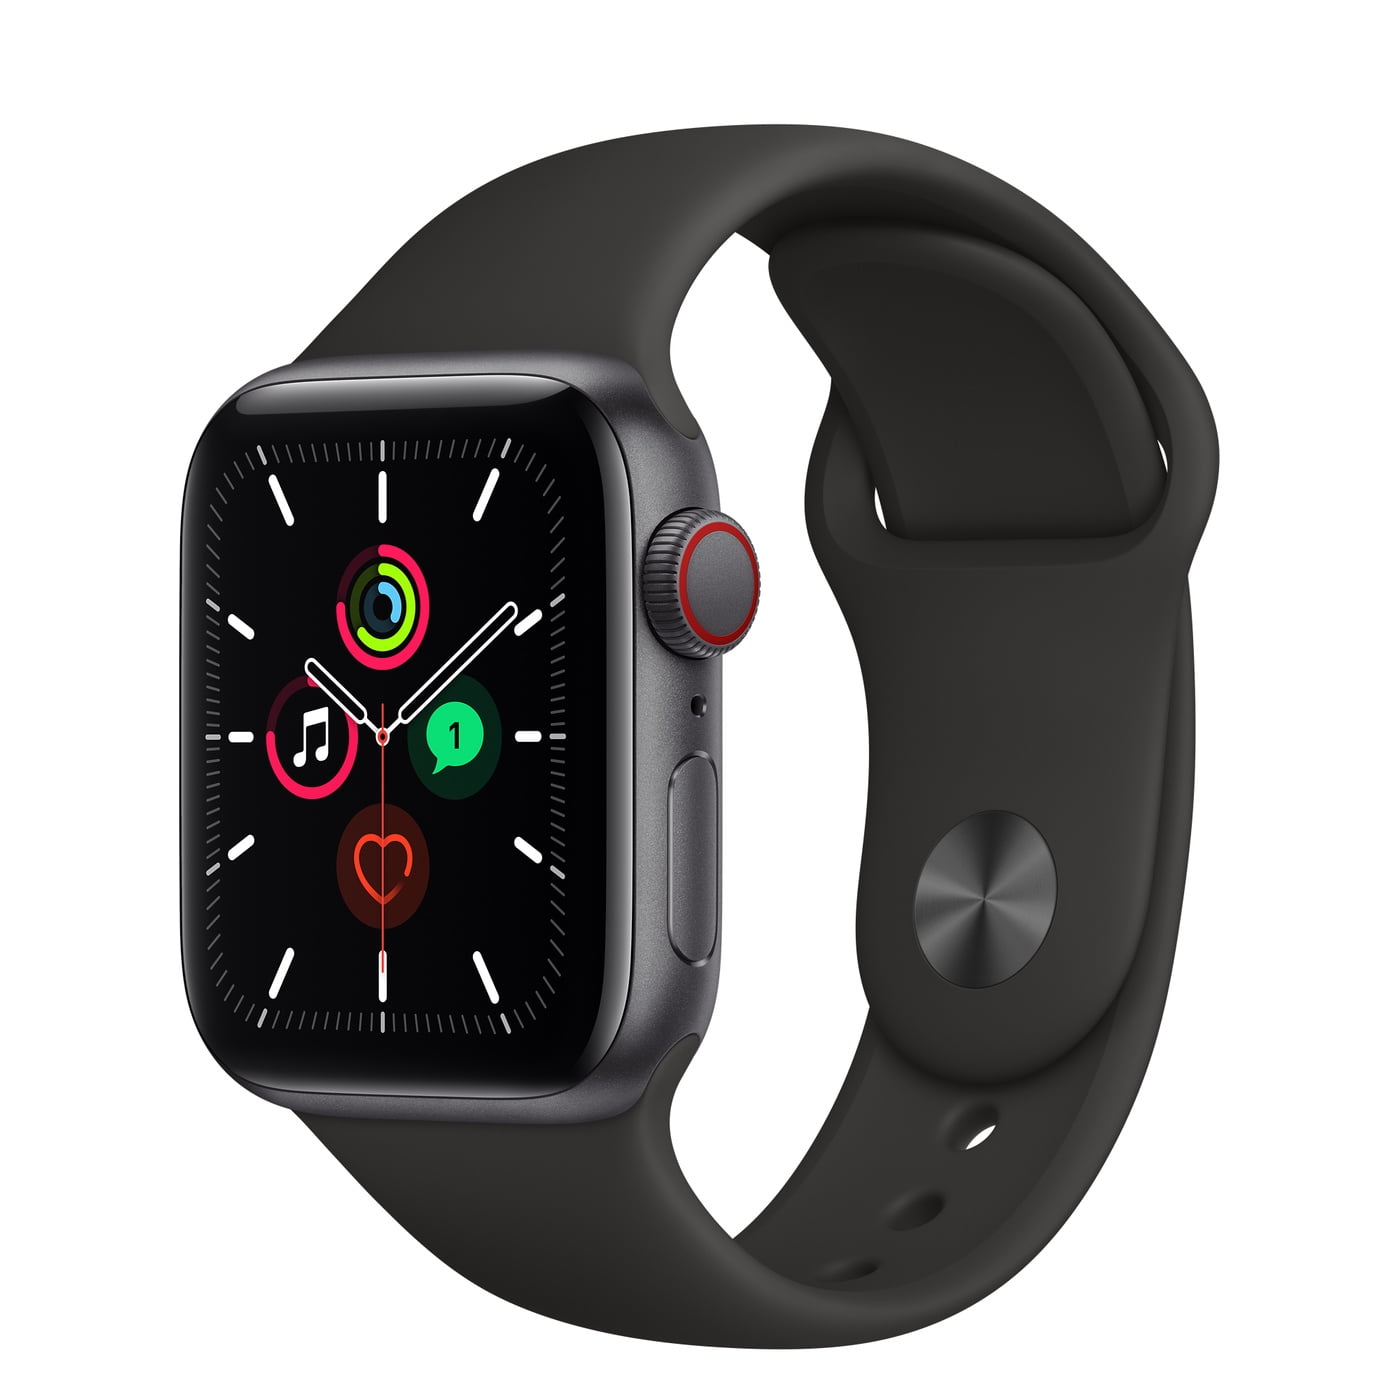 Apple Watch SE (GPS, 40mm) - Space Gray Aluminum Case with Black 